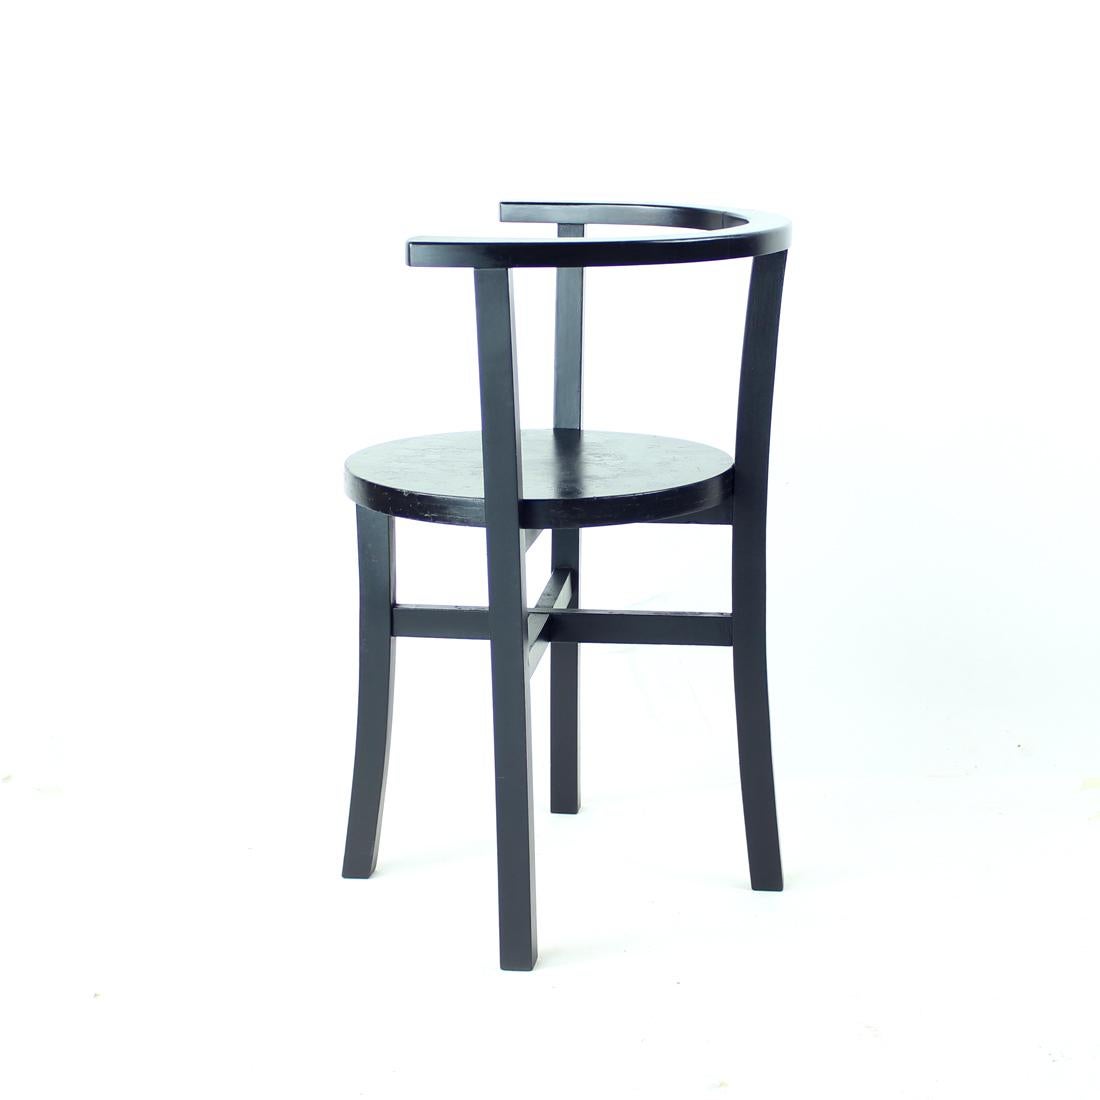 Mid-20th Century Set Of 4, Black Oak Dining Chairs, Czechoslovakia 1930s For Sale